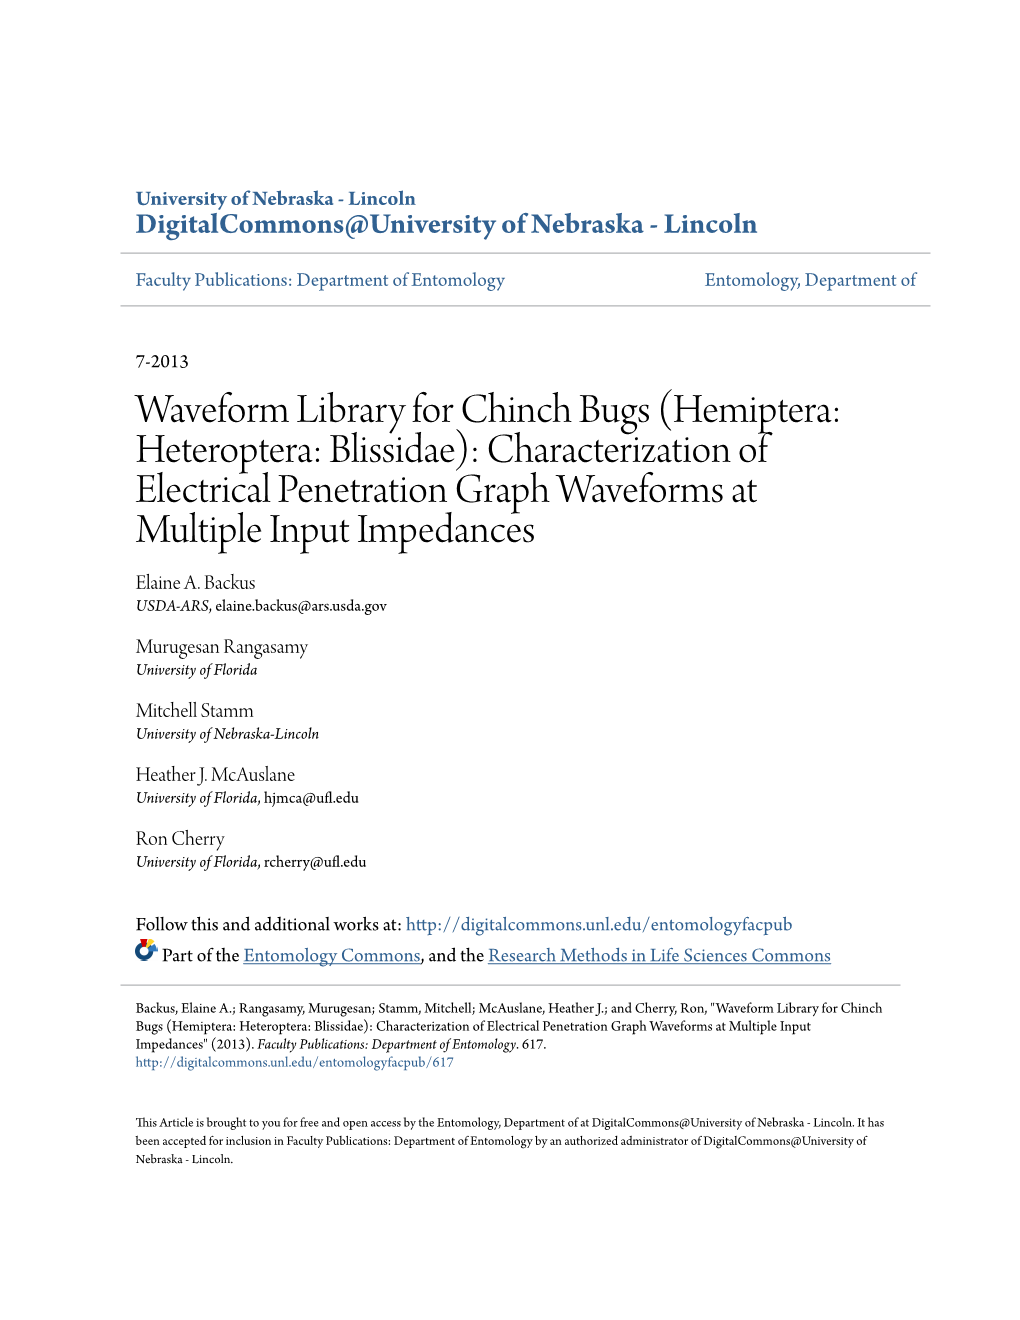 Waveform Library for Chinch Bugs (Hemiptera: Heteroptera: Blissidae): Characterization of Electrical Penetration Graph Waveforms at Multiple Input Impedances Elaine A